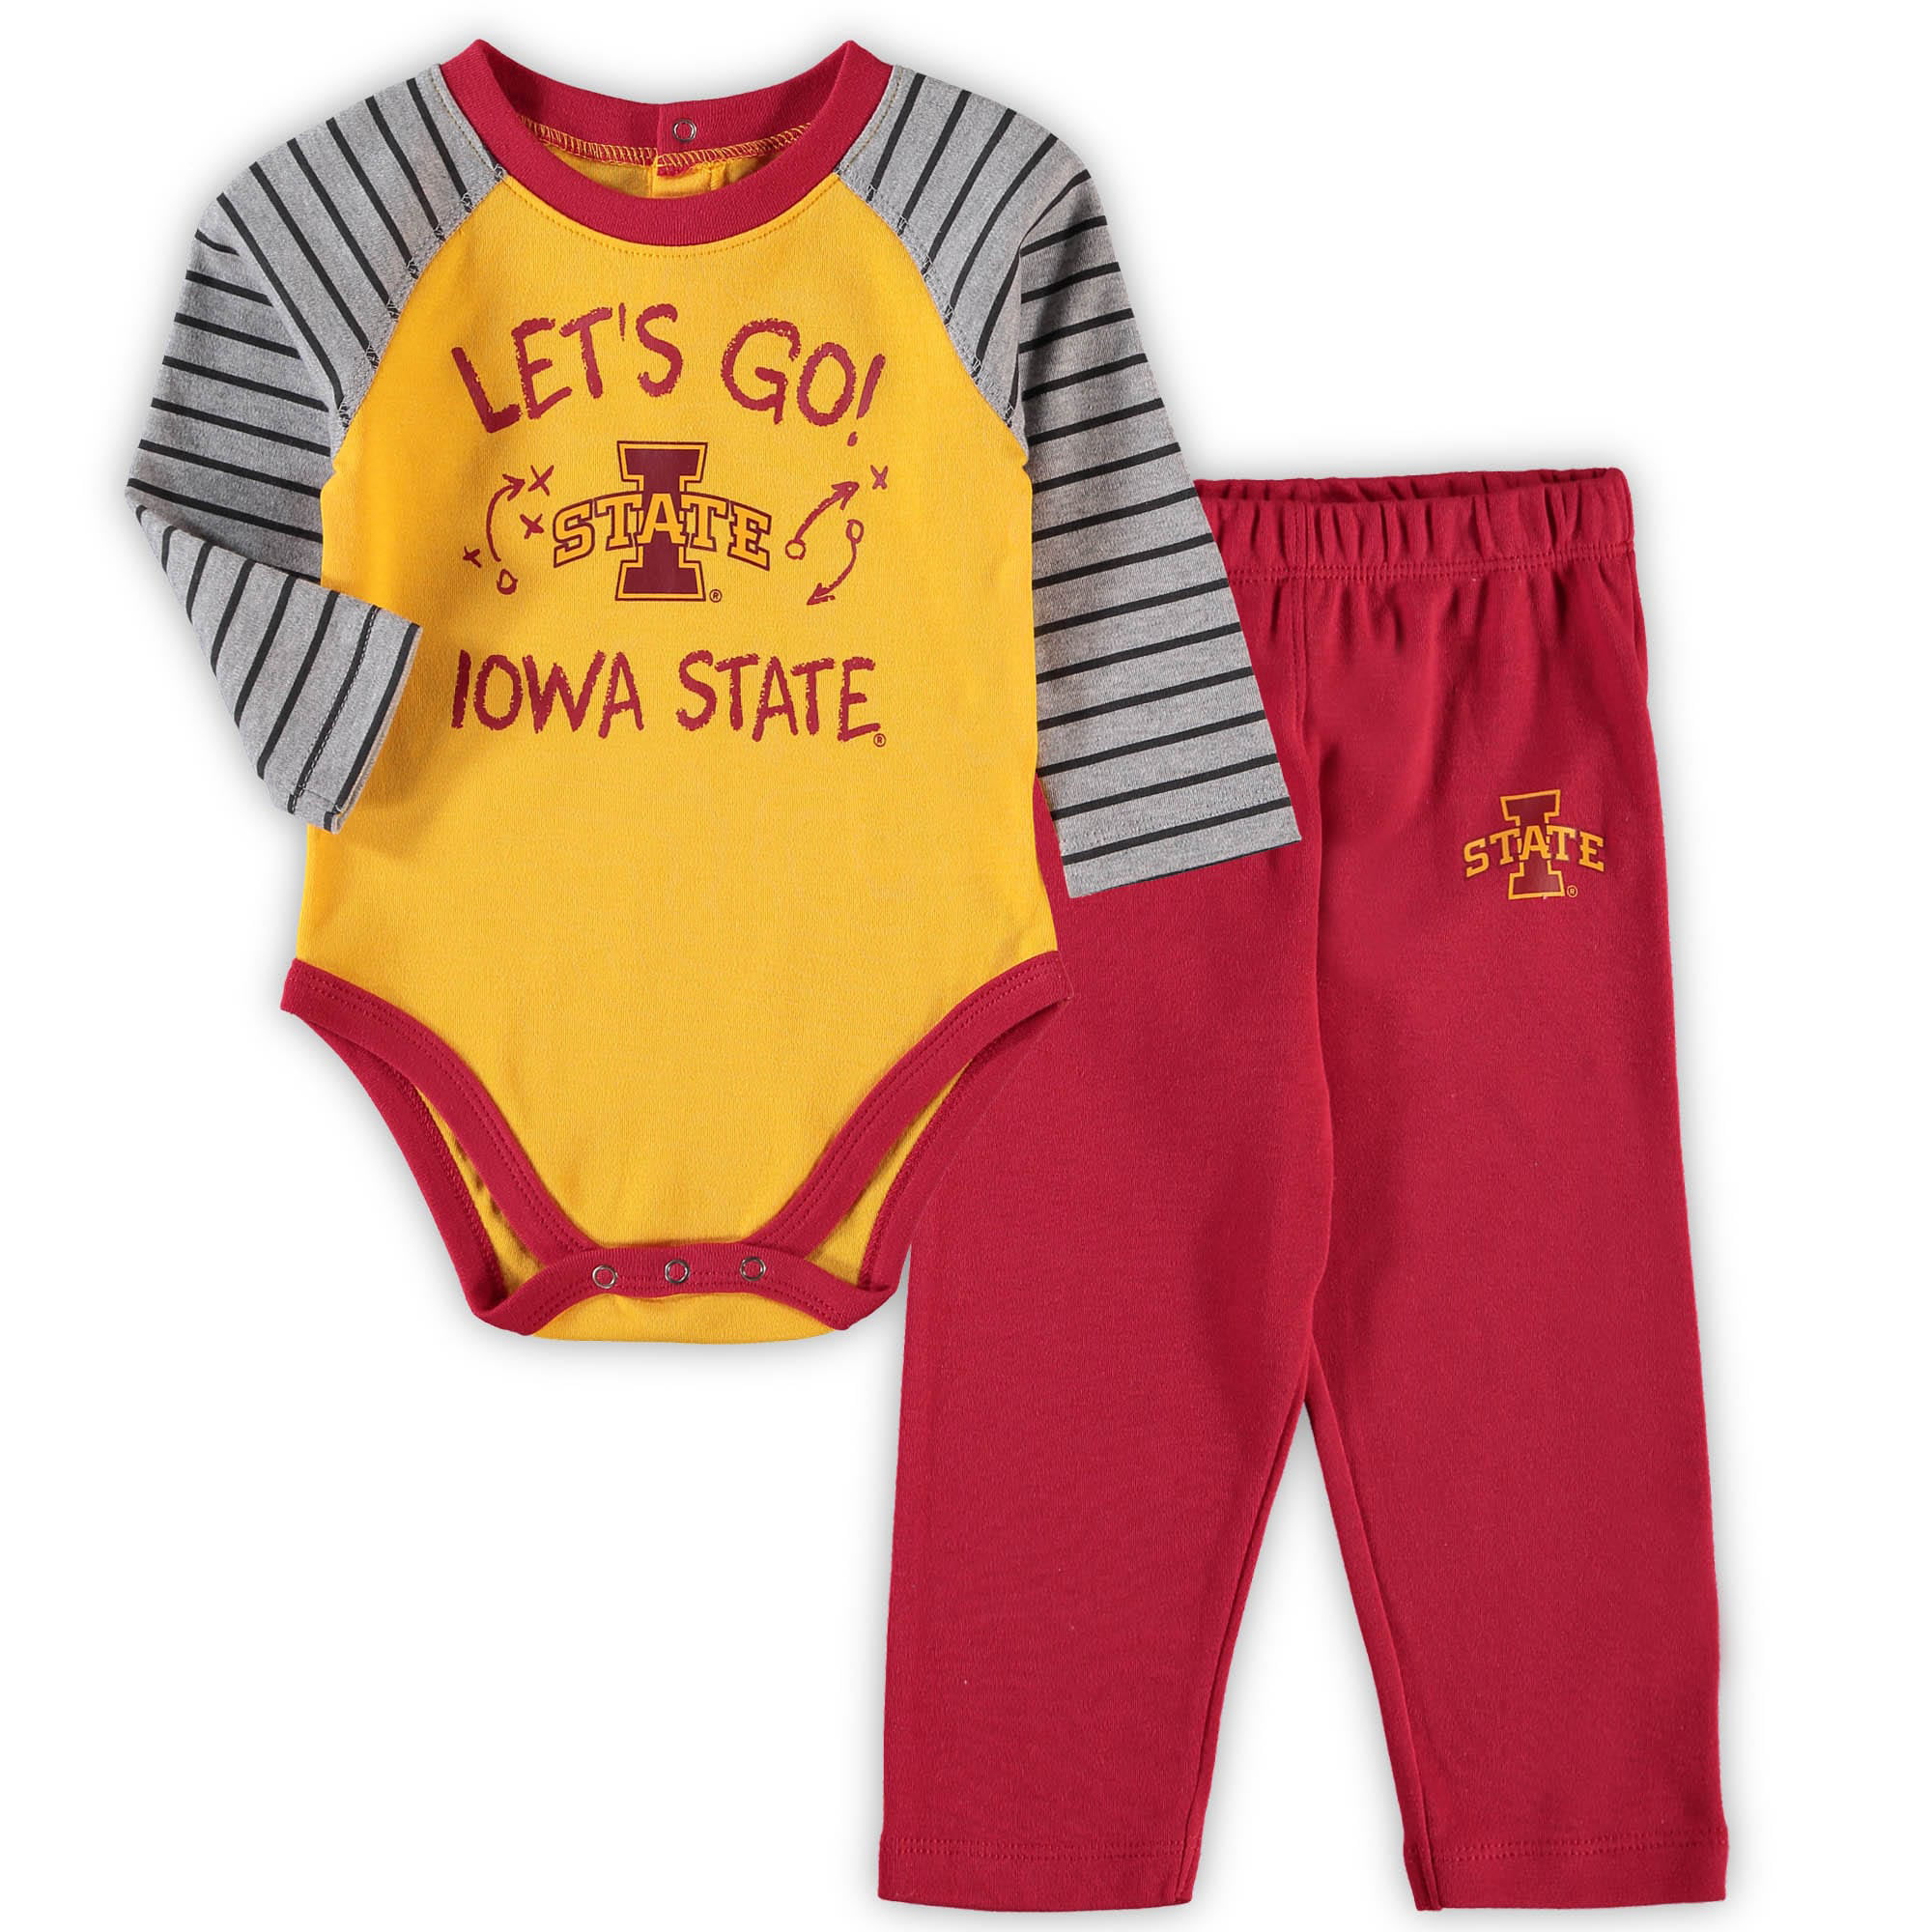 Fast Asleep Pjs Iowa State Cyclones Baby and Toddler Hooded